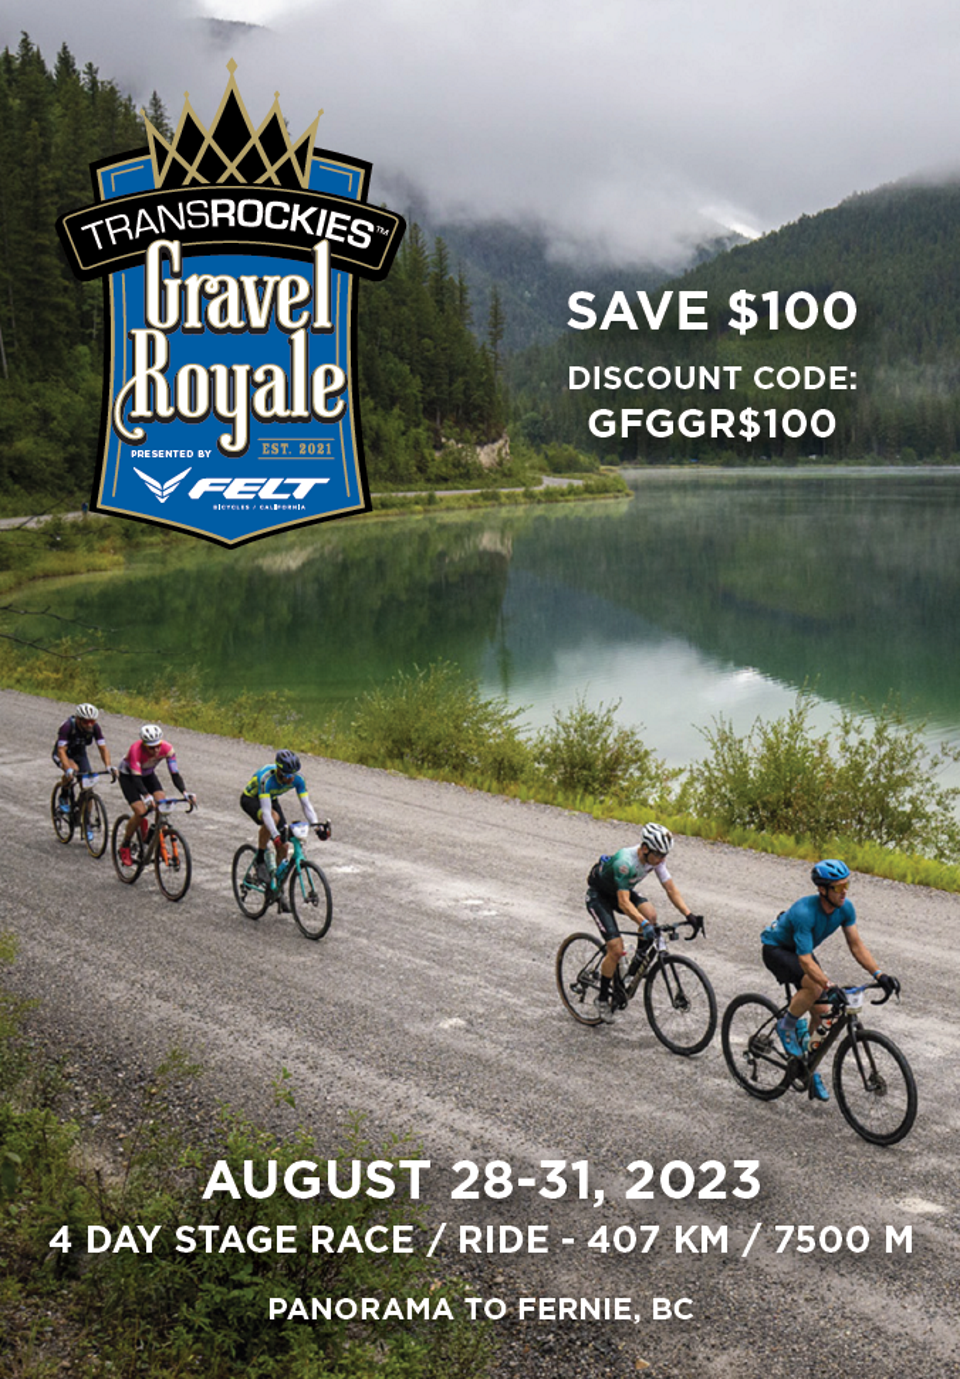 Gran Fondo Guide fans and followers, use discount code: GFGGR$100 and SAVE $100!